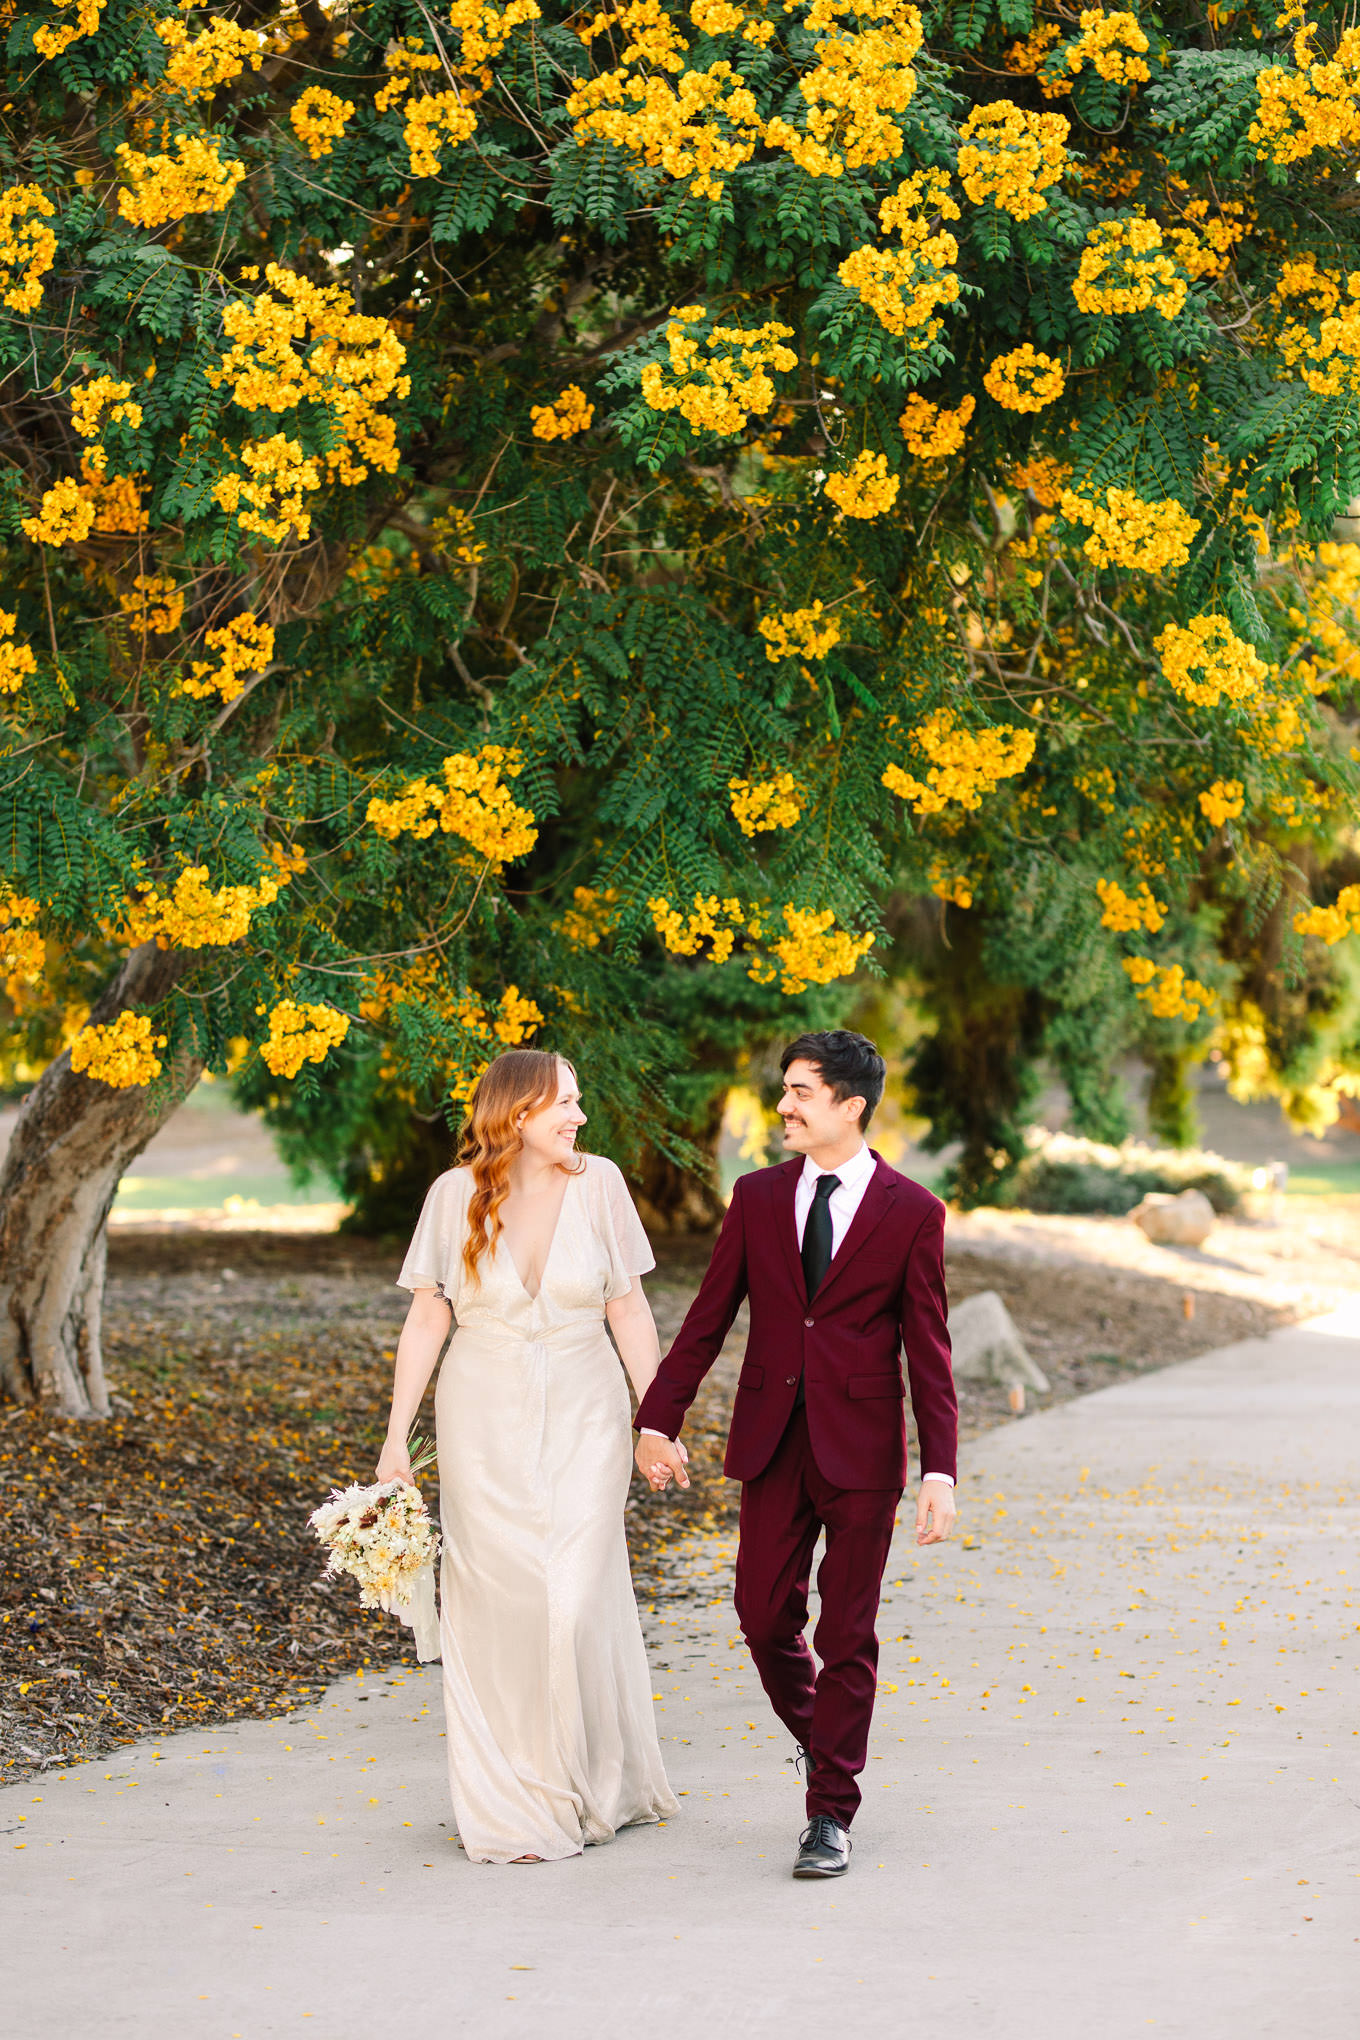 Couple walking among blooming trees | Los Angeles Arboretum Elopement | Colorful and elevated wedding photography for fun-loving couples in Southern California | #LosAngelesElopement #elopement #LAarboretum #LAskyline #elopementphotos   Source: Mary Costa Photography | Los Angeles